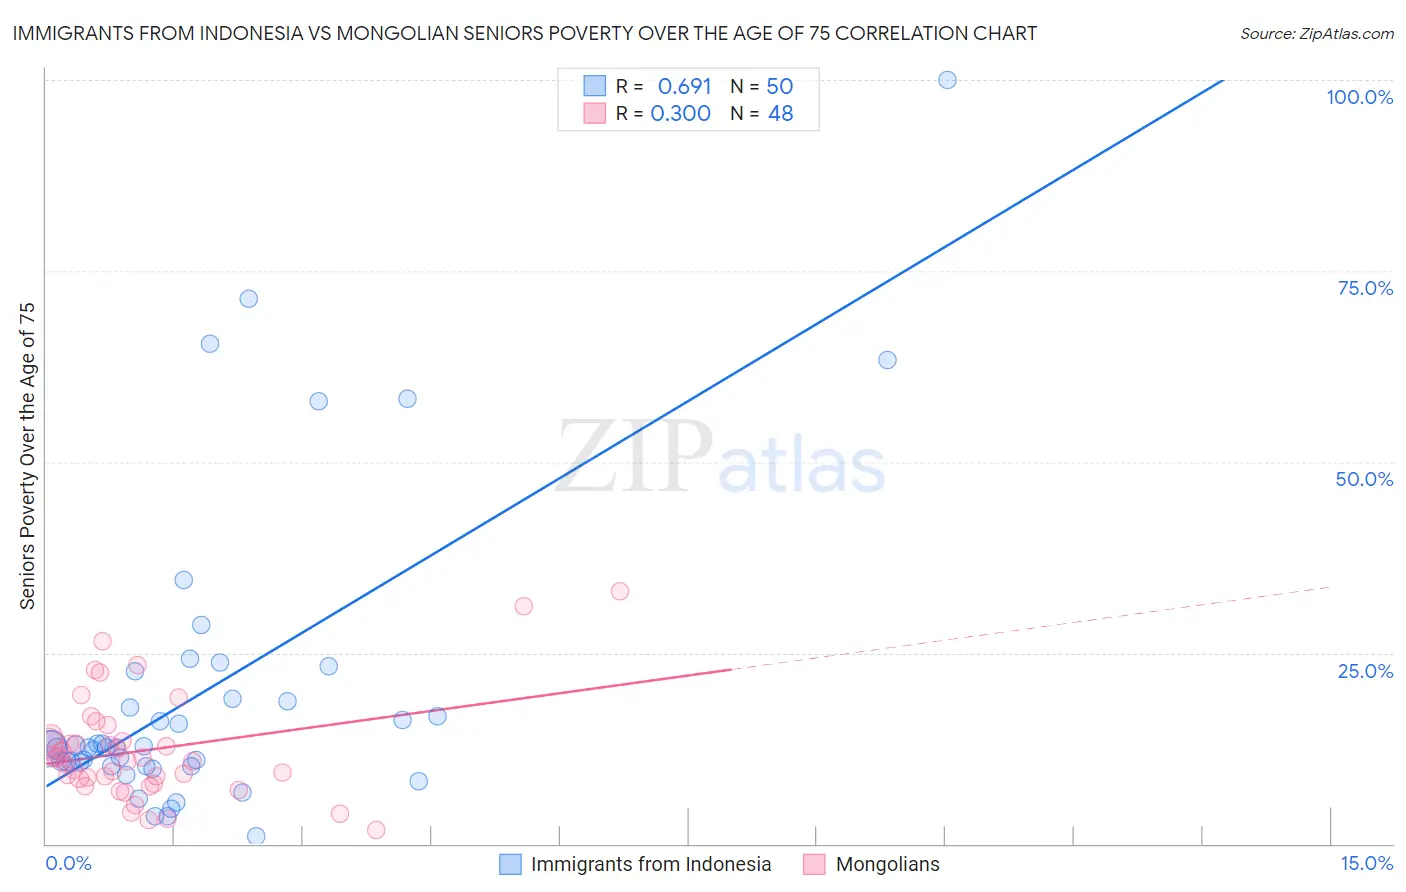 Immigrants from Indonesia vs Mongolian Seniors Poverty Over the Age of 75